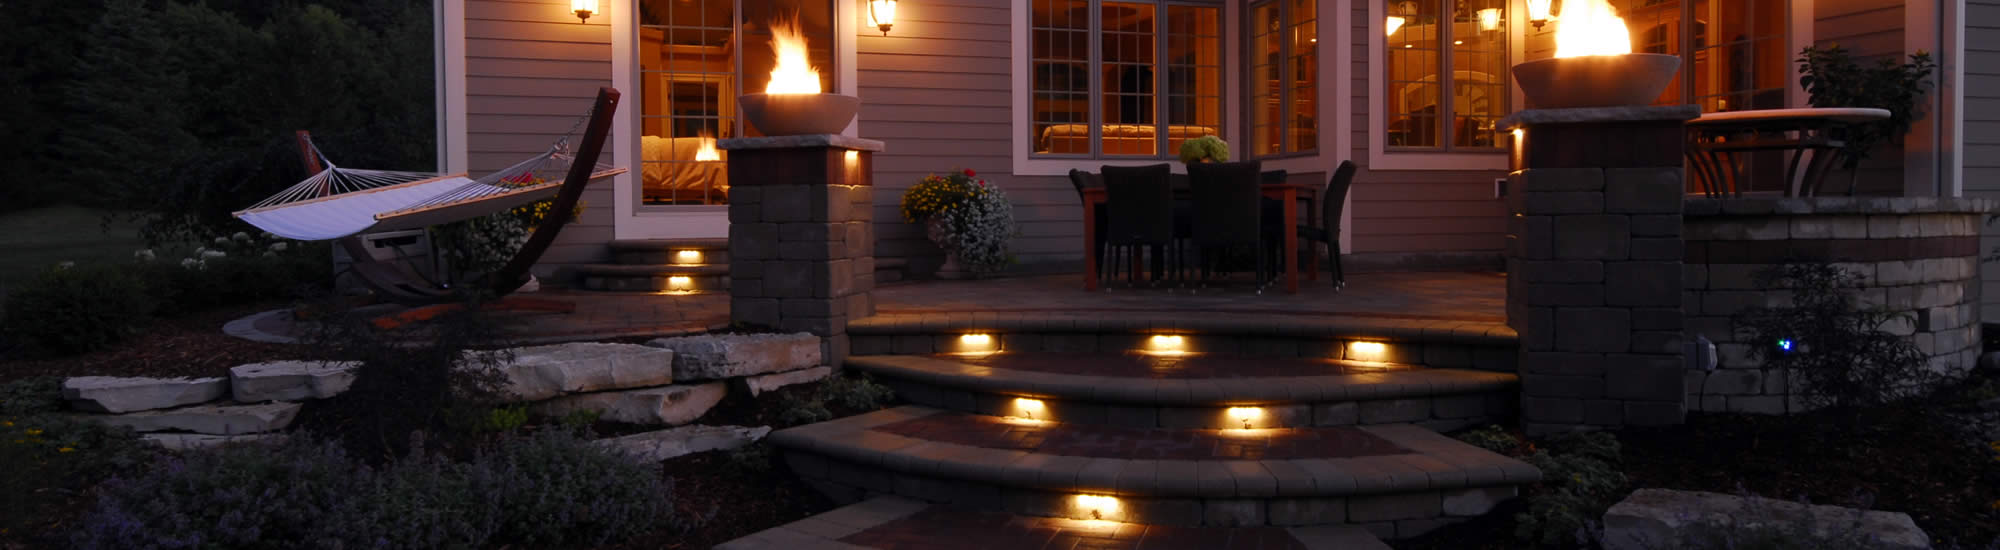 Fire Featurs | Outdoor Fire Places and Firepits